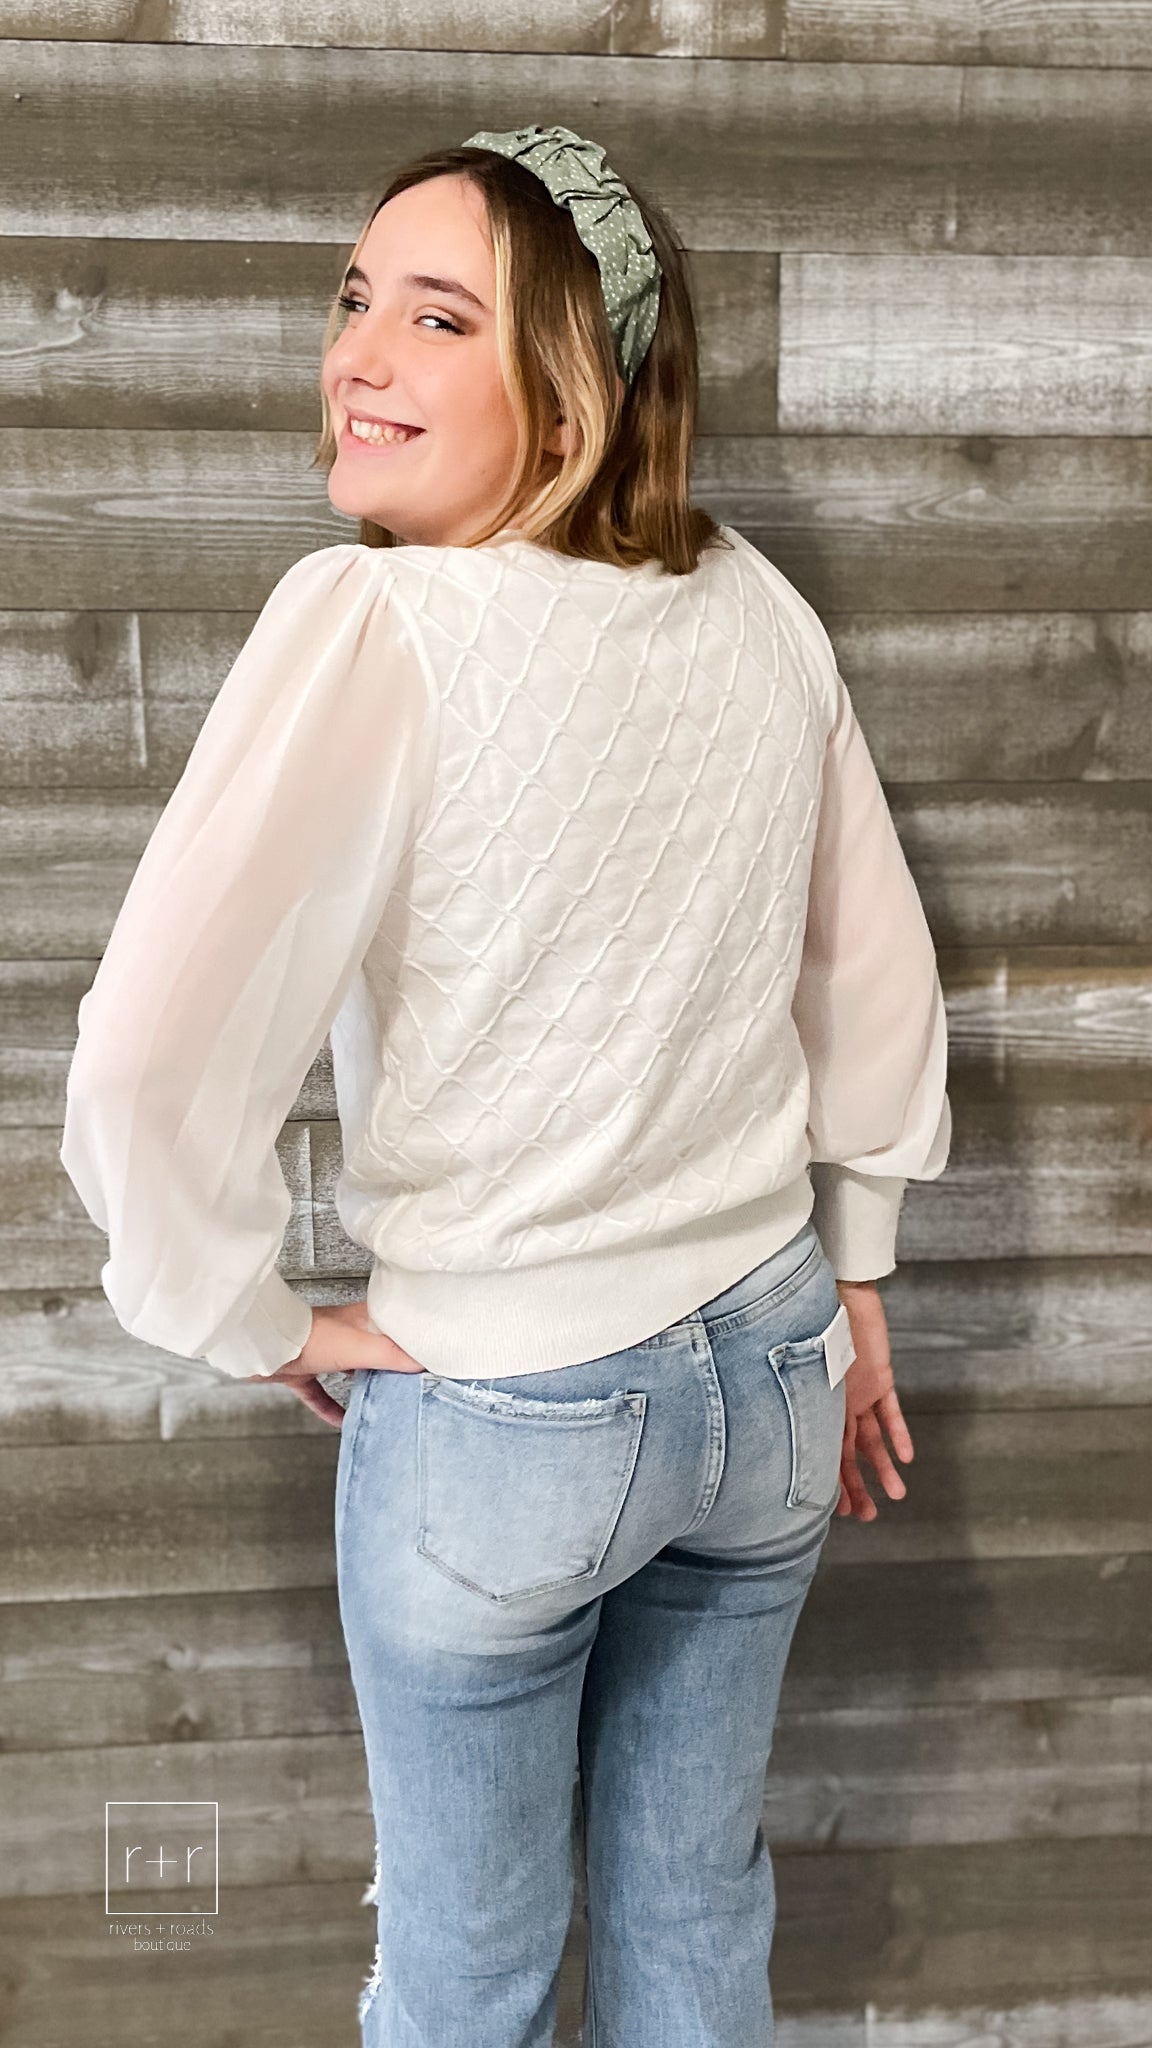 jodifl mixed fabric cotton sweater with sheer peasant sleeves G10817 off white